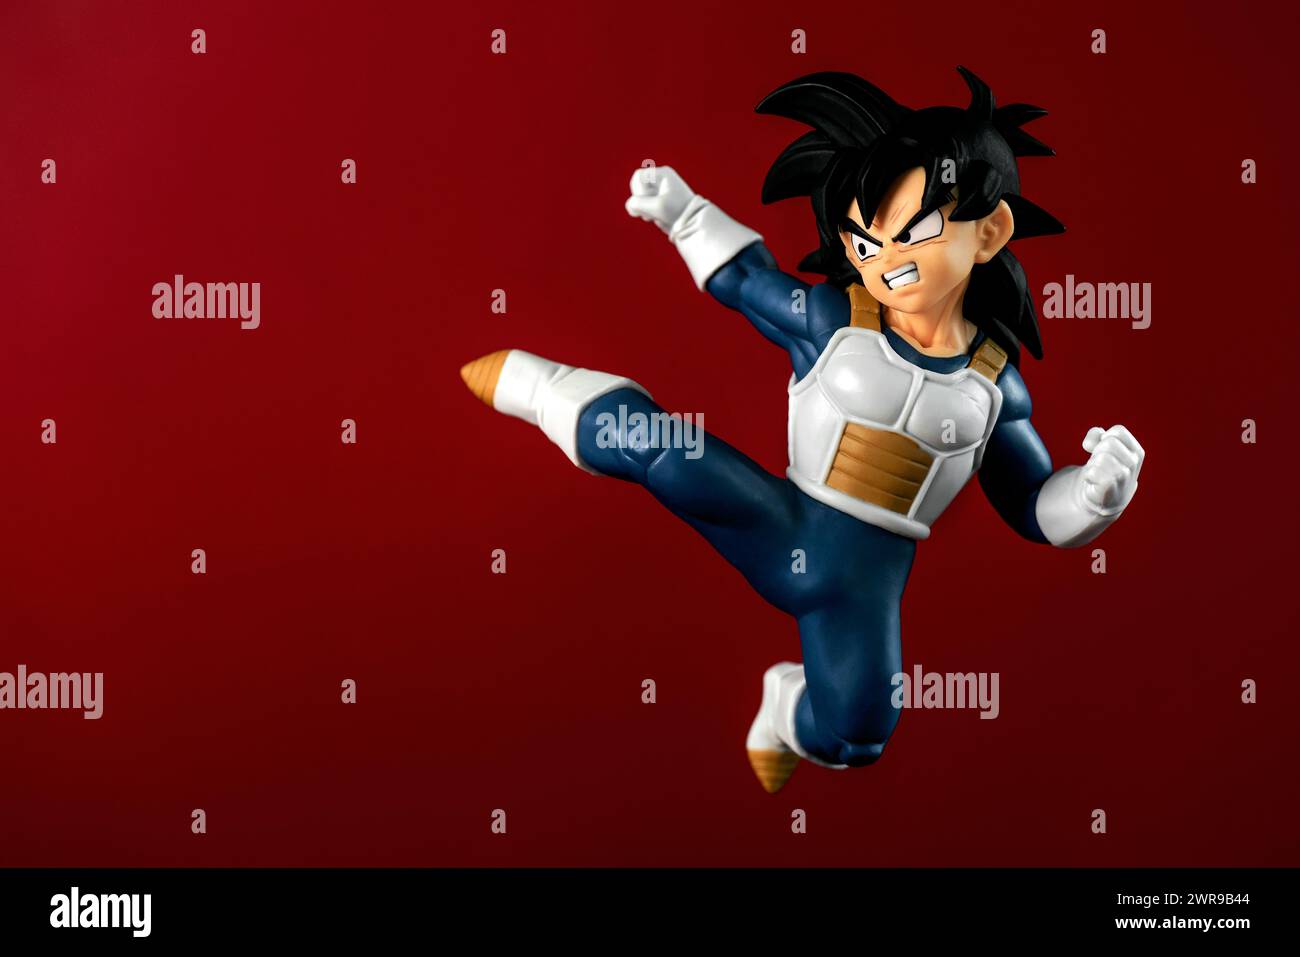 Figure of Son Gohan character of the Dragon Ball Z manga series created by Akira Toriyama over red background. Illustrative editorial Stock Photo